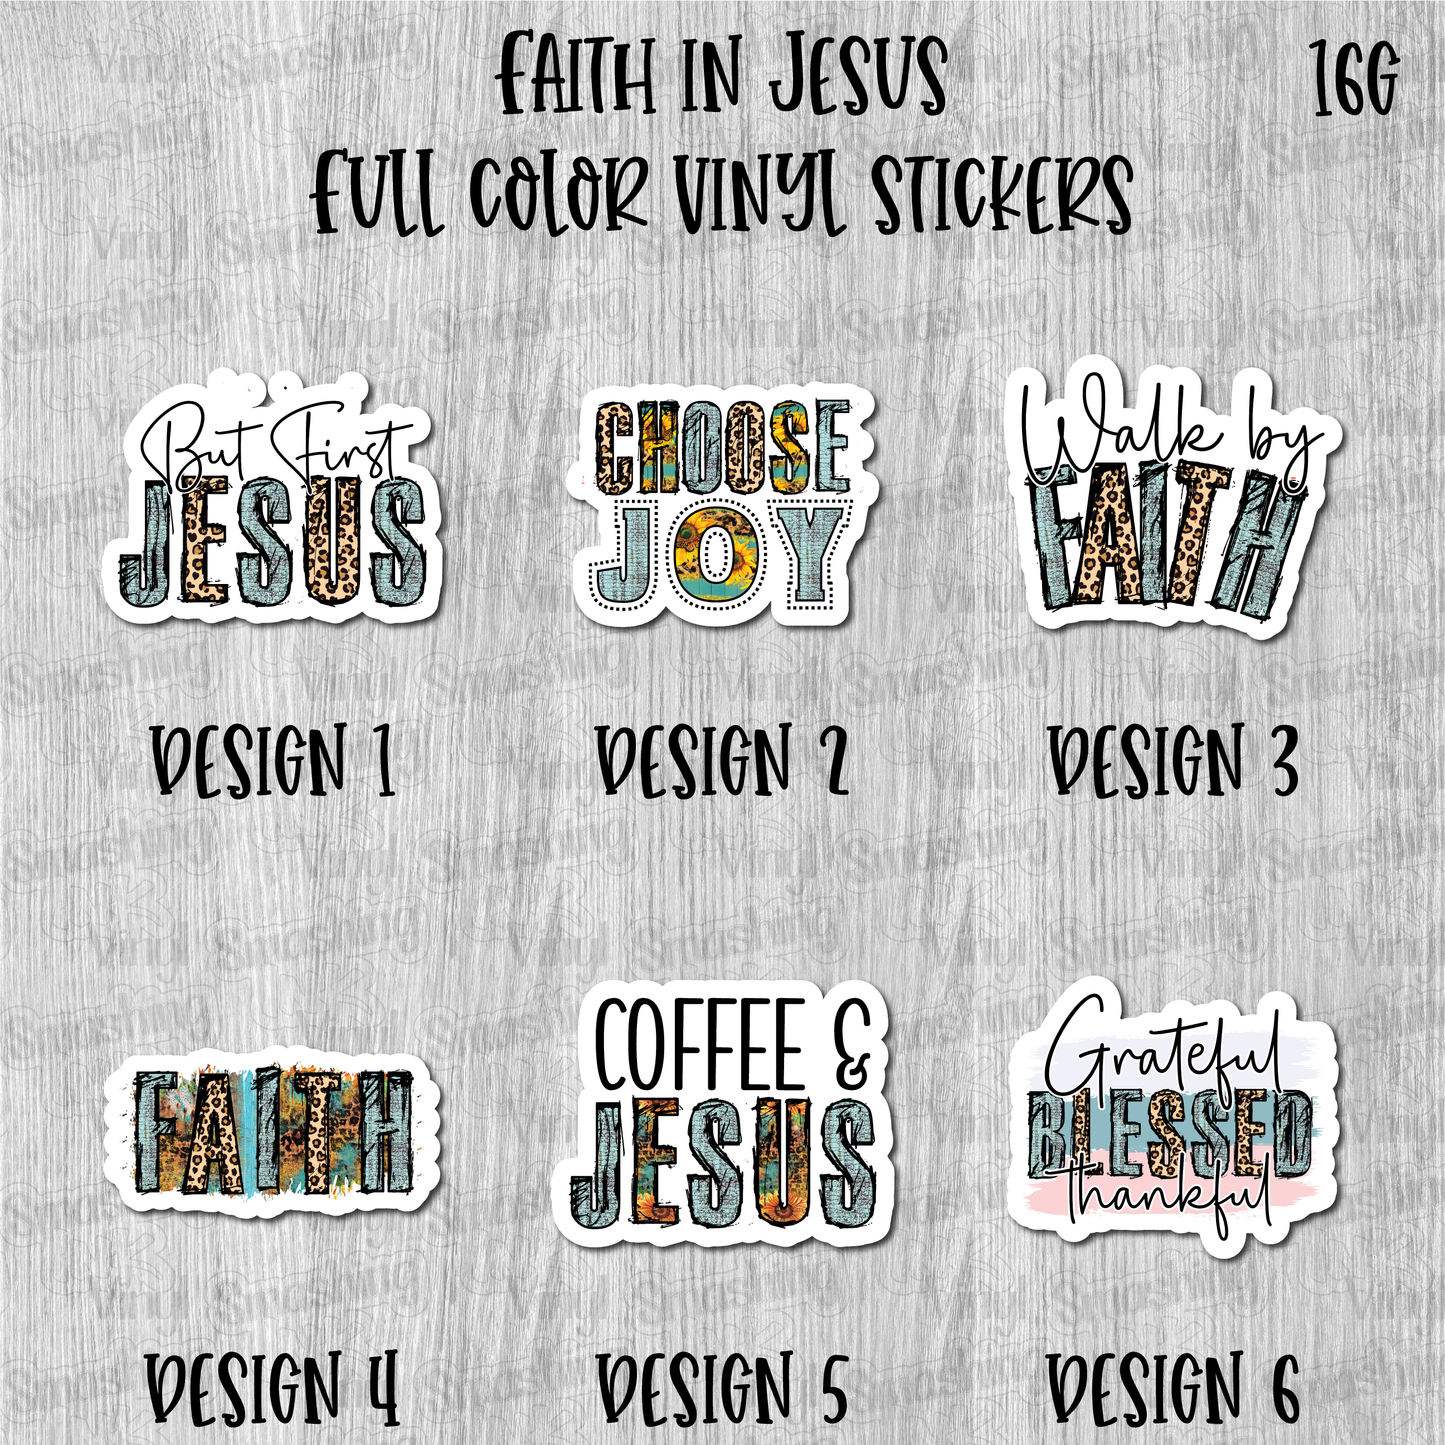 Faith In Jesus - Full Color Vinyl Stickers (SHIPS IN 3-7 BUS DAYS)